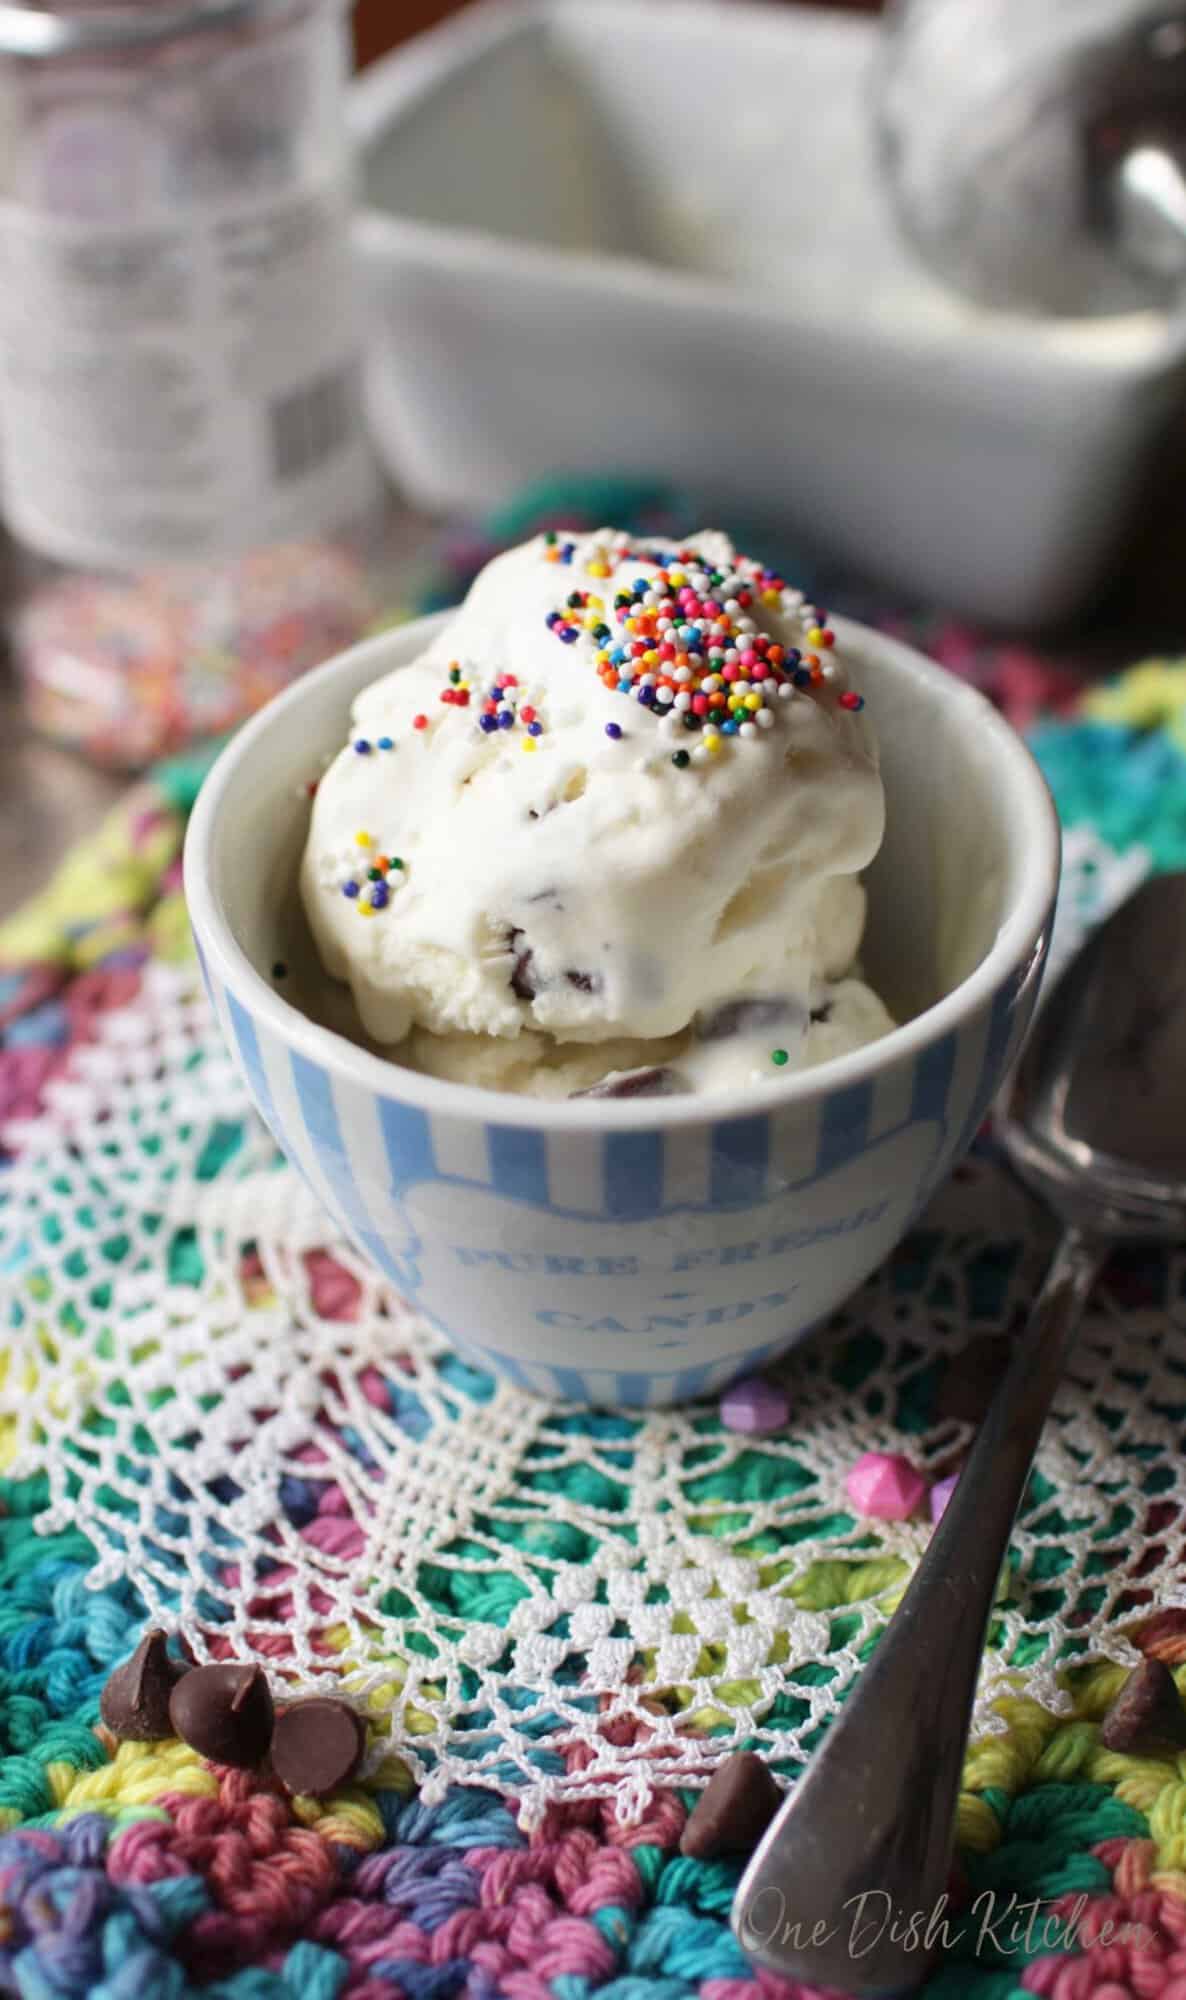 A small bowl of mint chocolate chip ice cream topped with rainbow sprinkles on a colorful surface next to a spoon and scattered chocolate chips